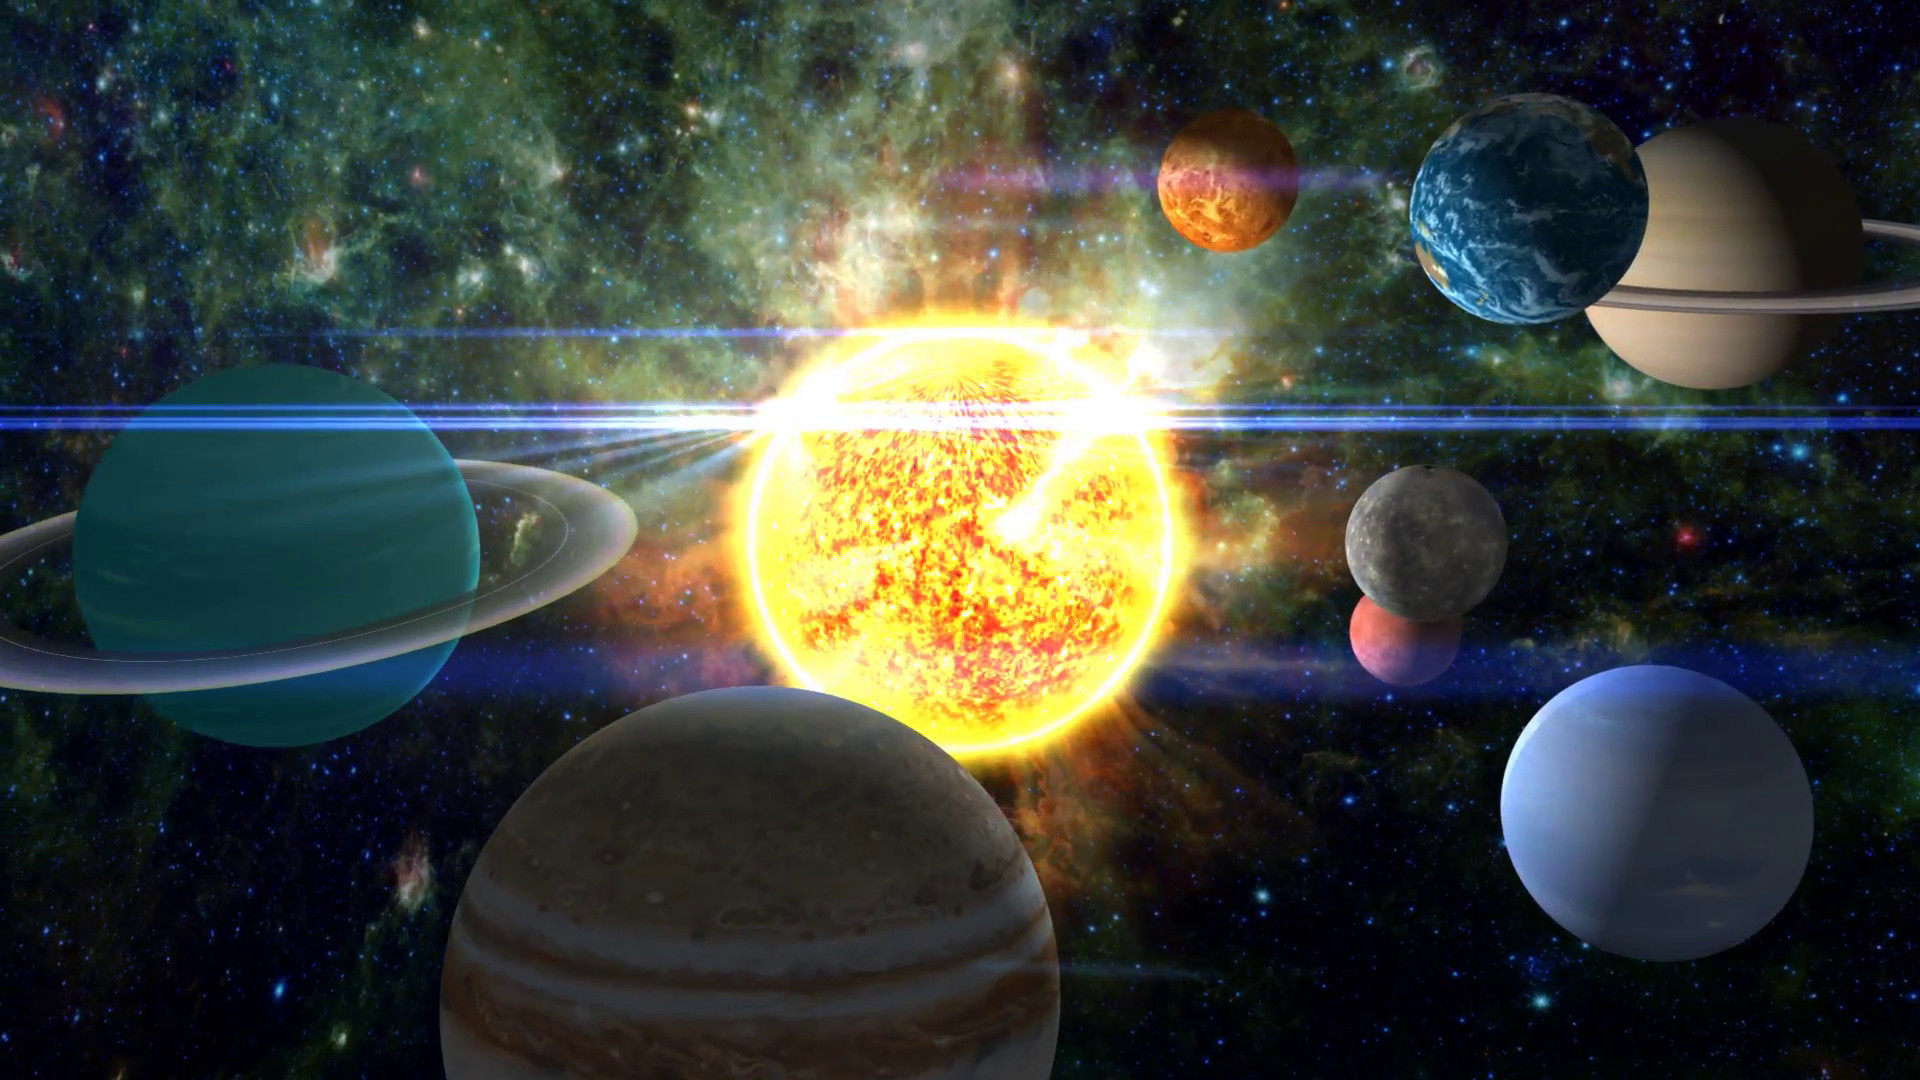 1920x1080 ... moving shot around and through all the planets of the solar system,  scattered around the burning sun. Includes lens flare, nebular and star  background, ...